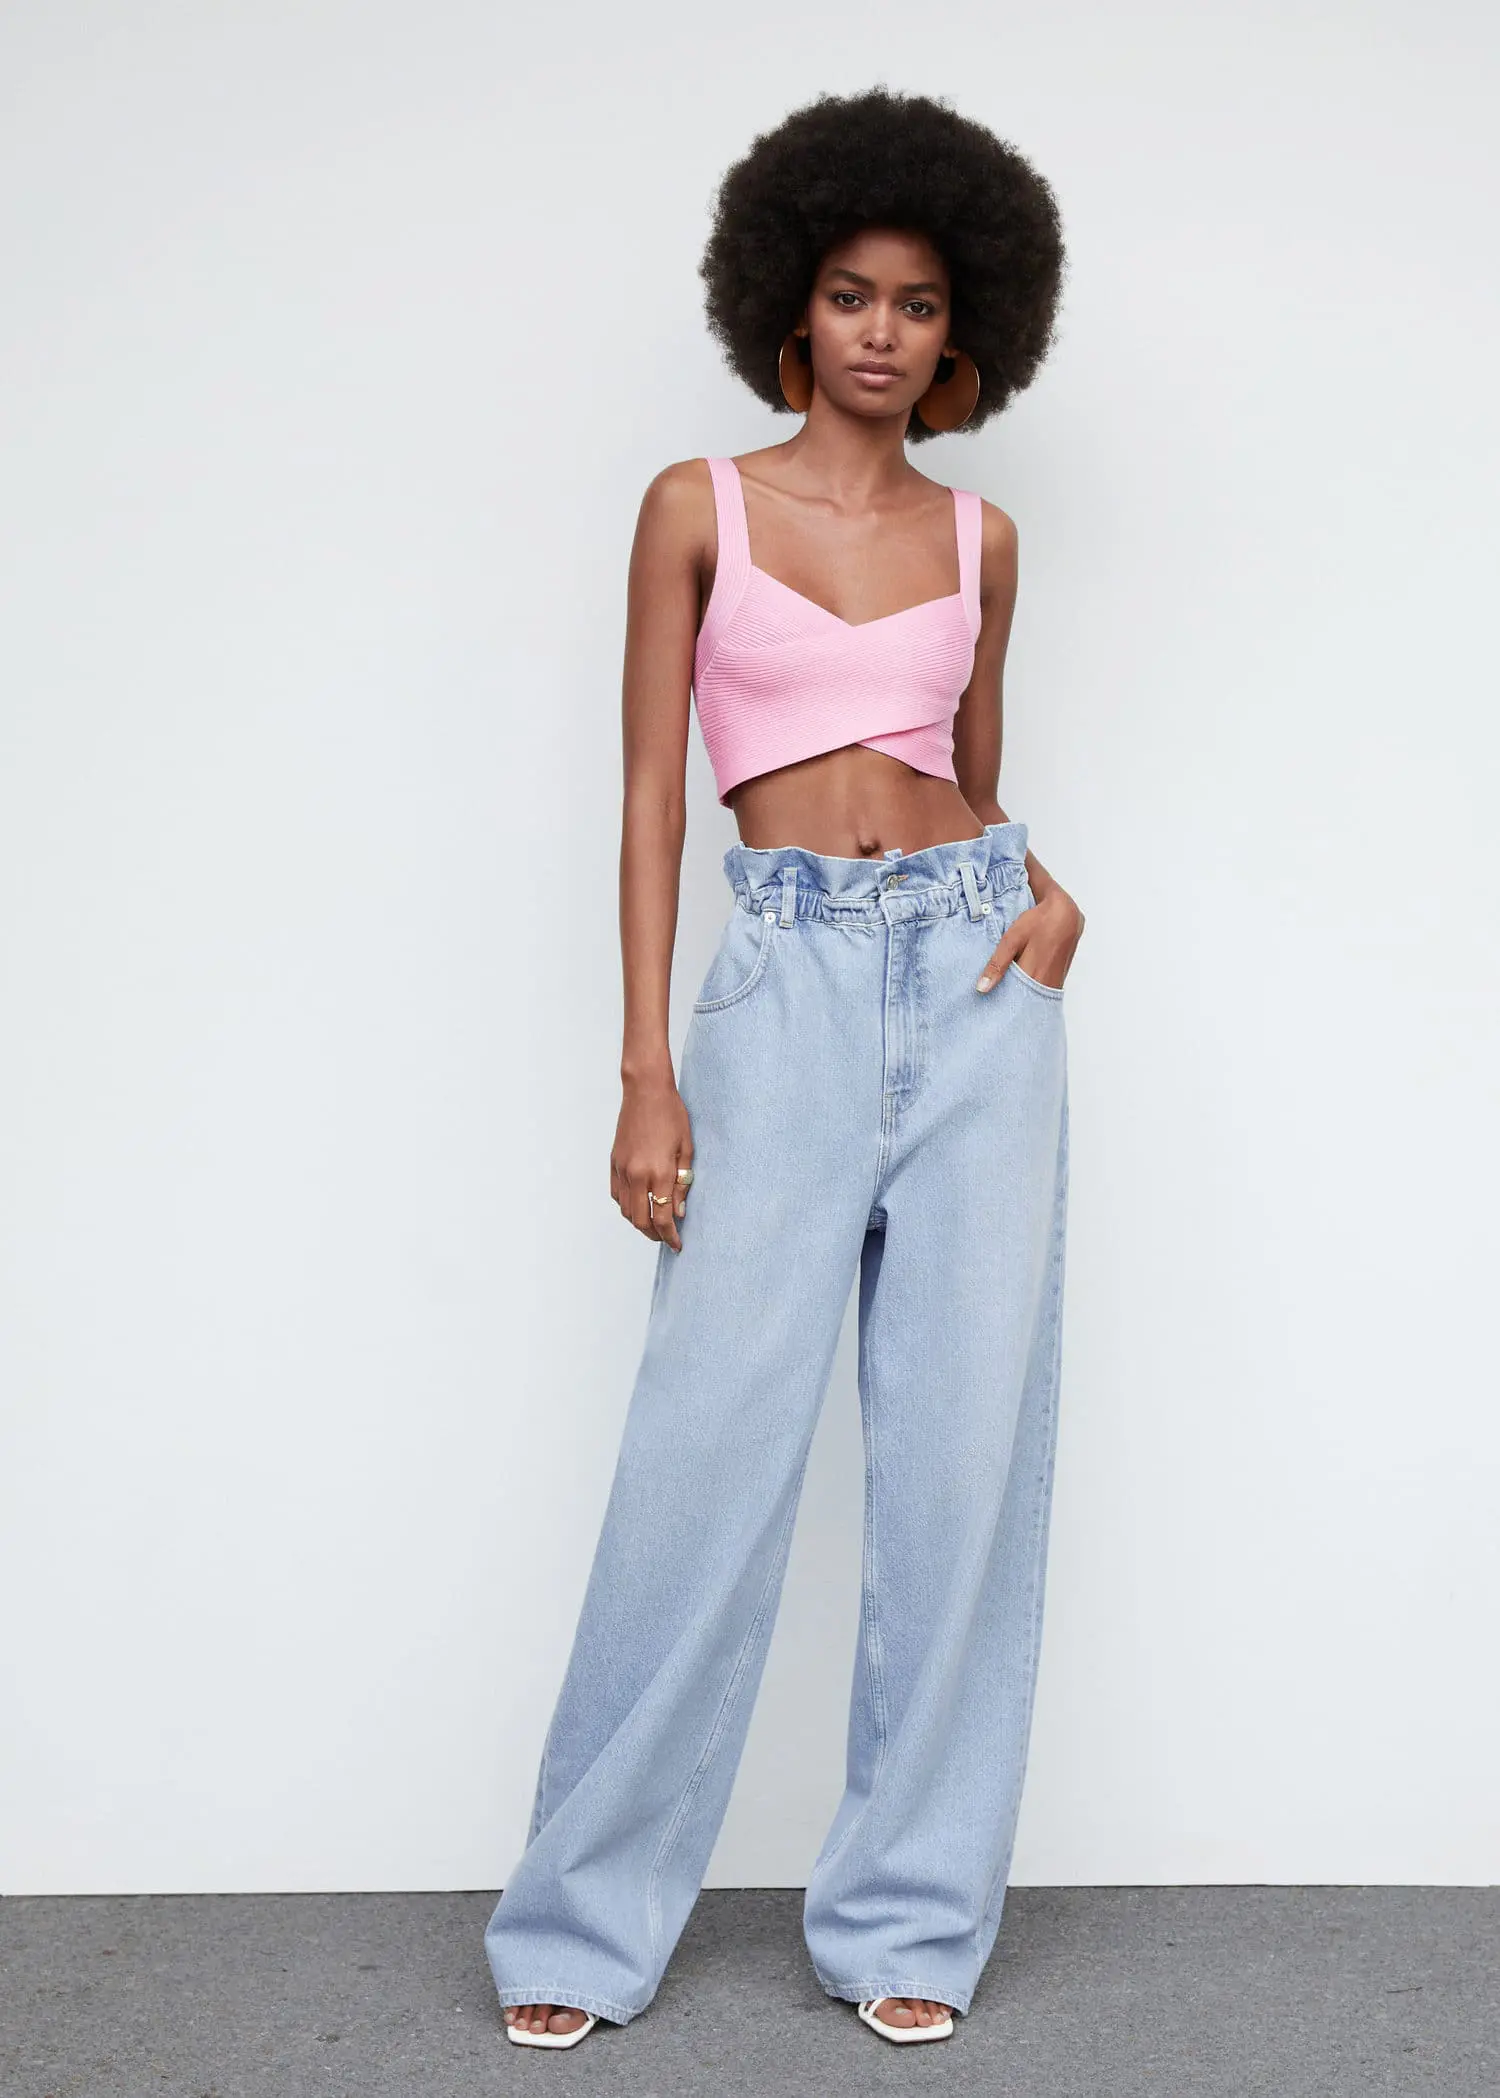 Mango Waist straight Slouchy jeans. a woman in a pink top and blue jeans. 